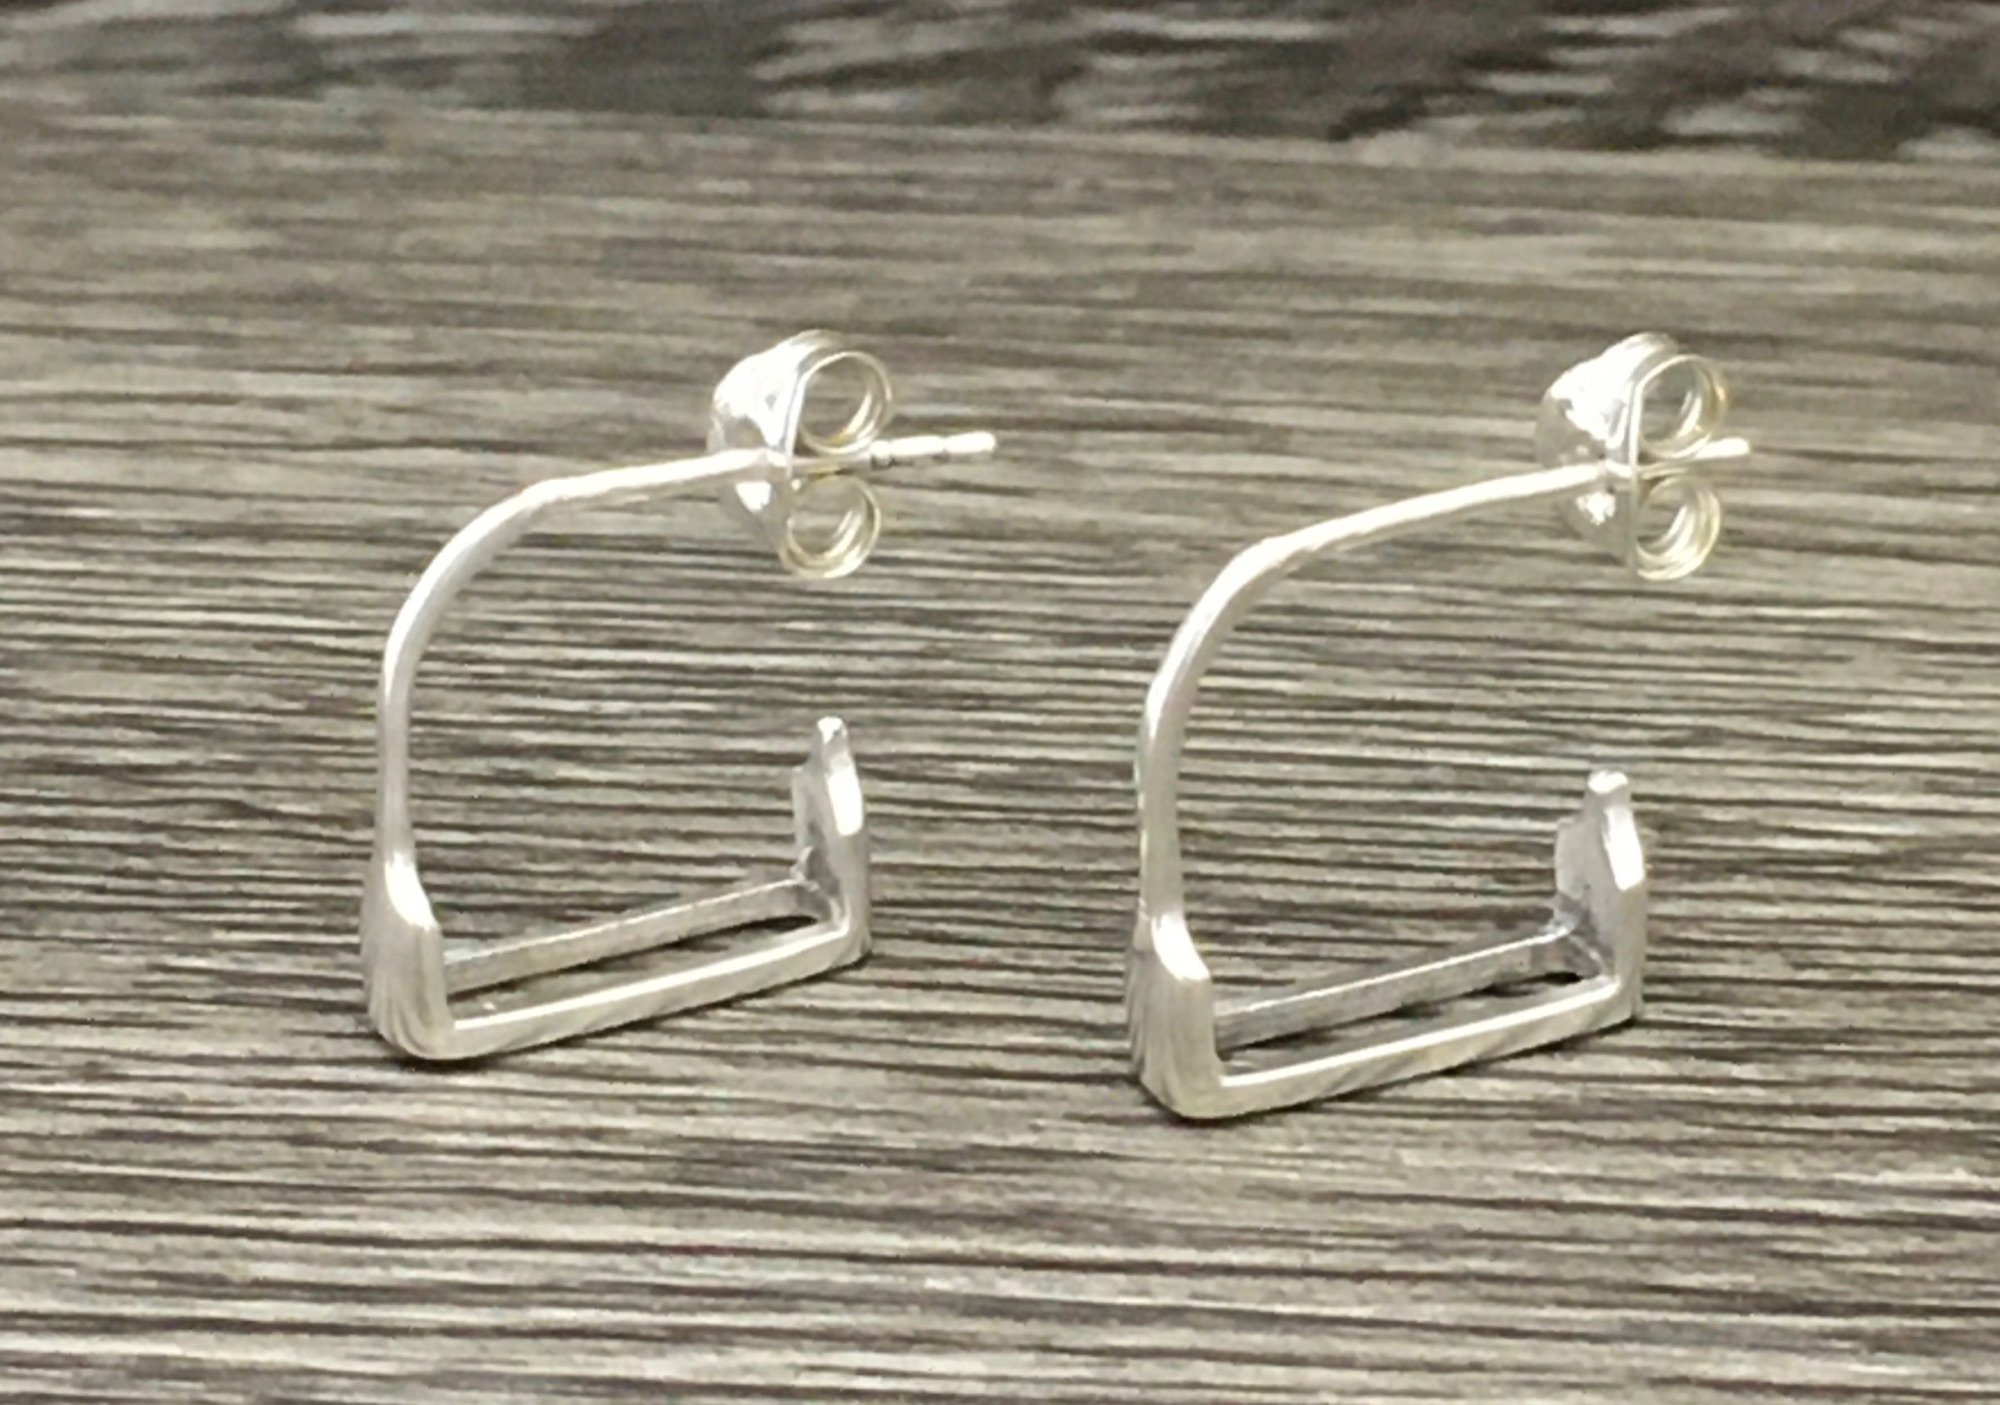 A pair of sterling silver stirrup shaped earrings